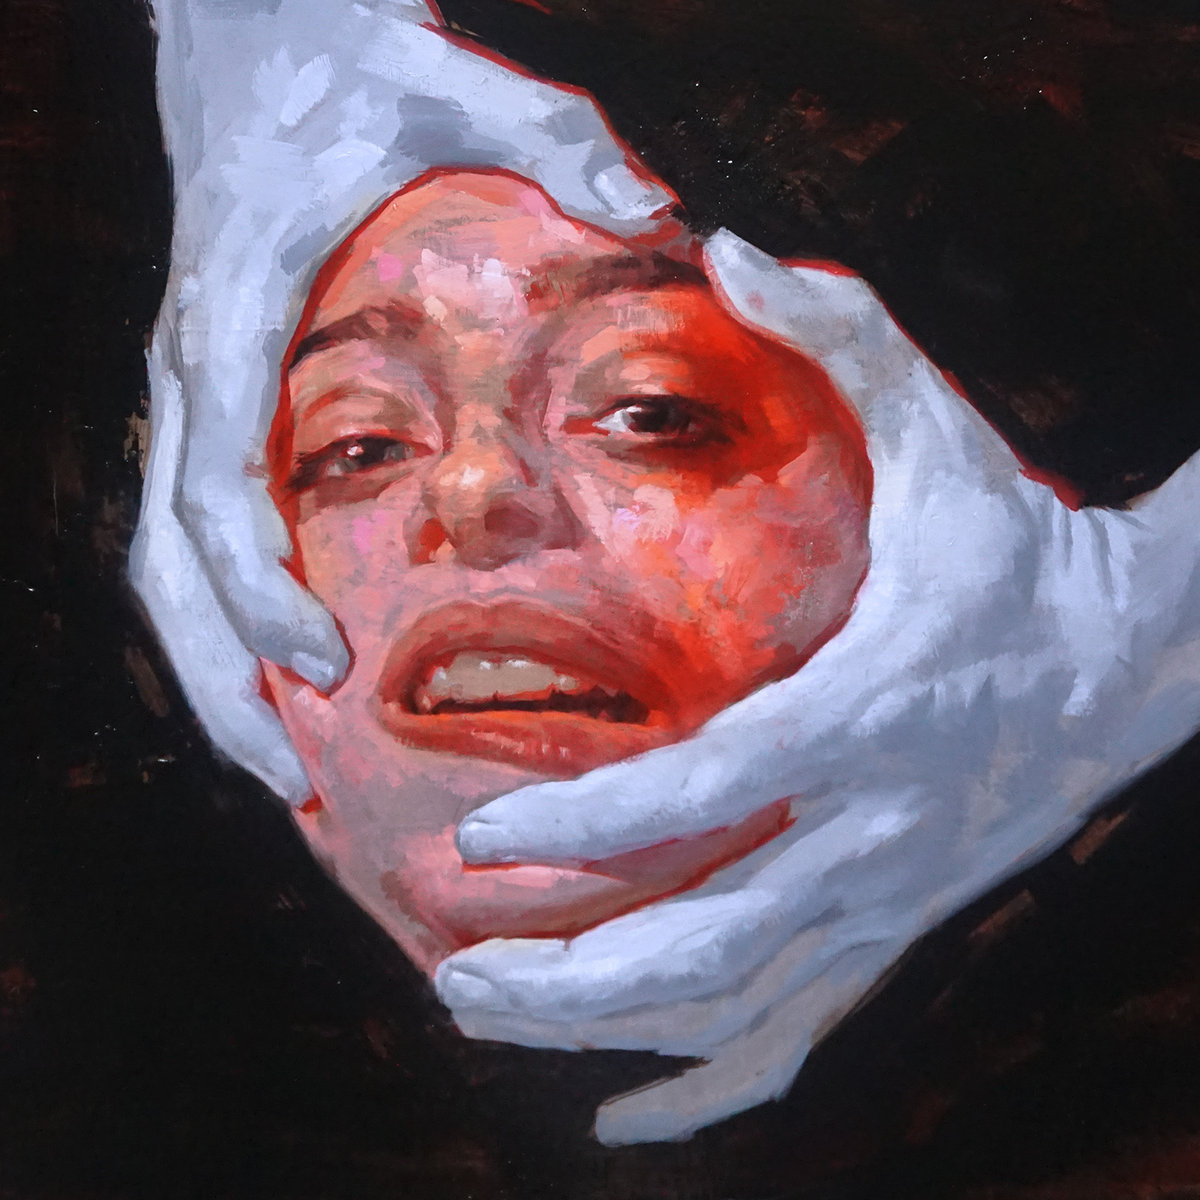 Image is a painting of a person's face, painted red, gripped by two hands, painted light blue.